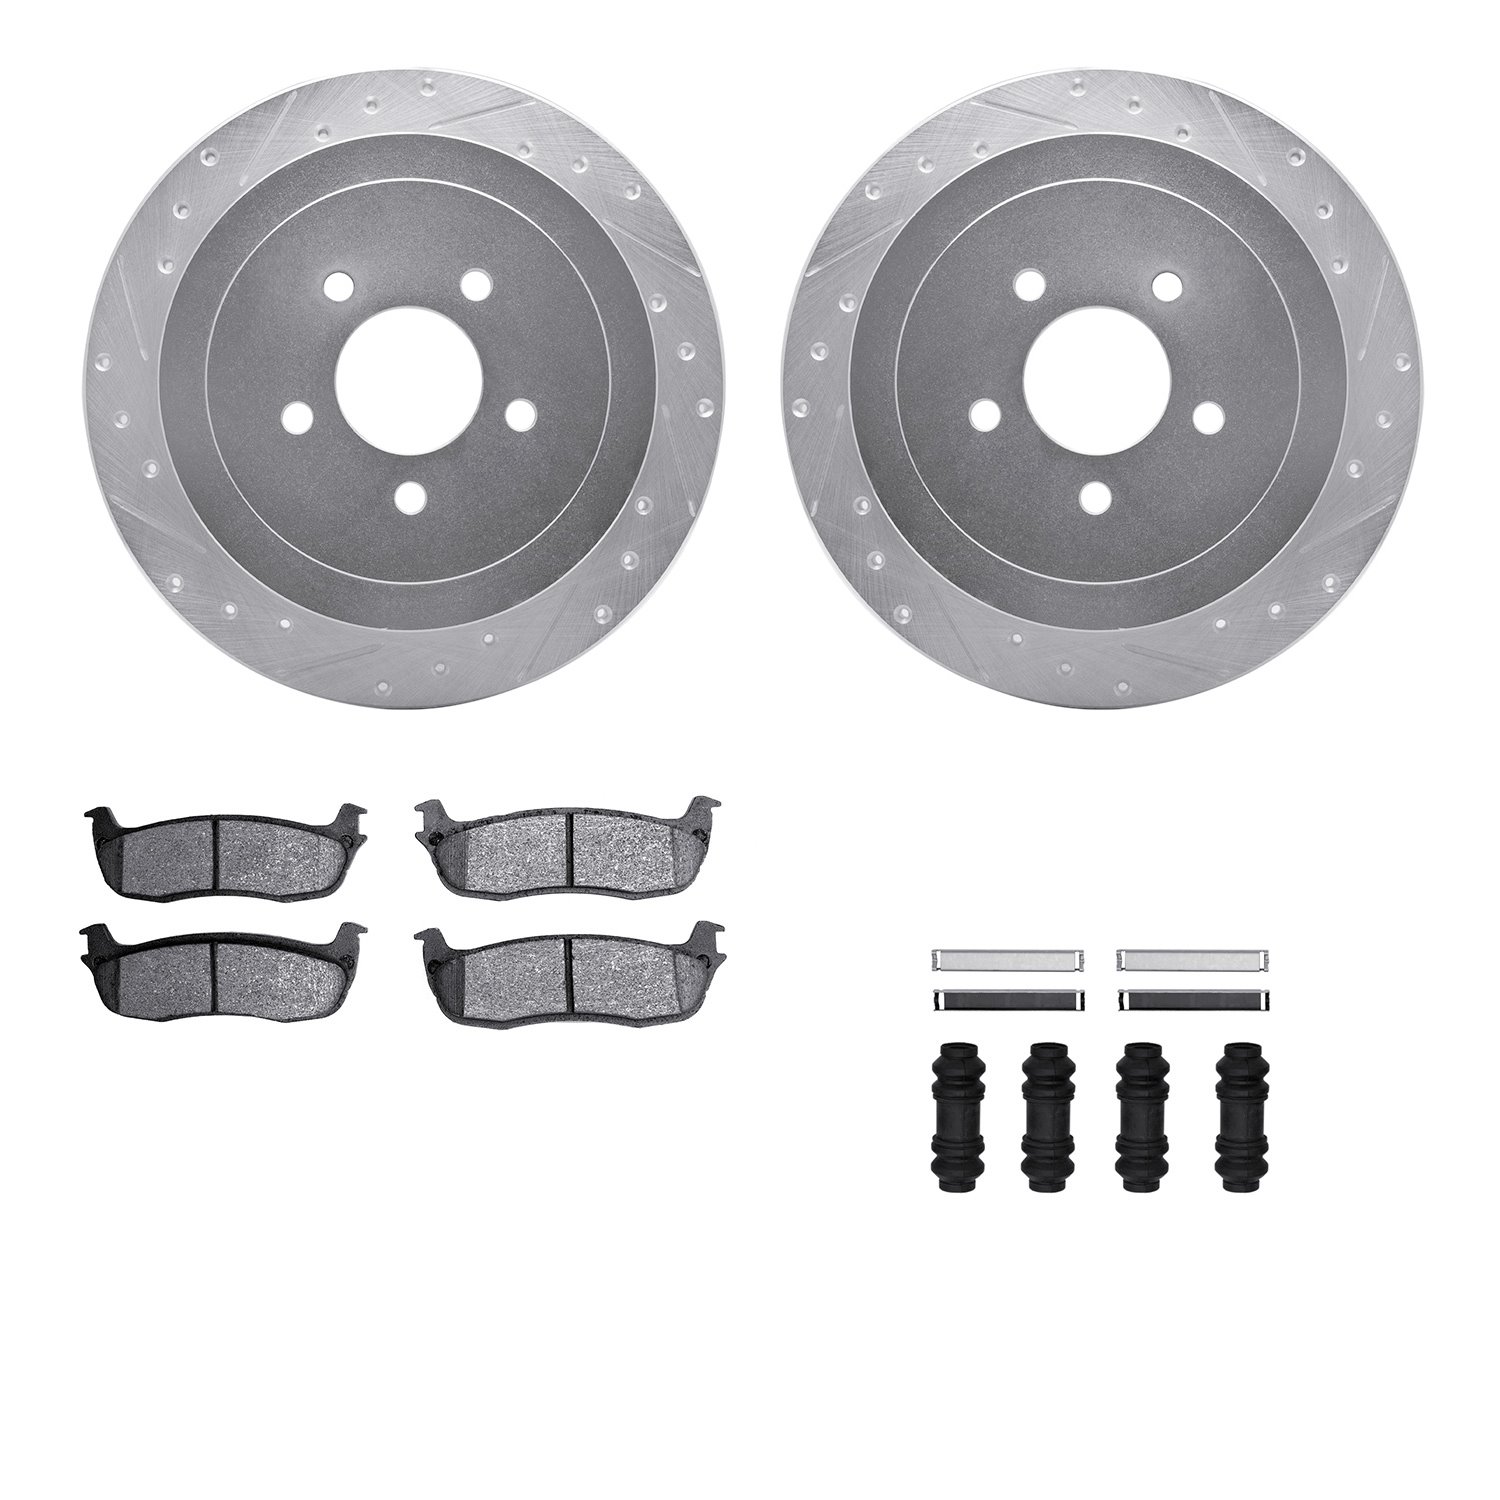 7412-55001 Drilled/Slotted Brake Rotors with Ultimate-Duty Brake Pads Kit & Hardware [Silver], 2003-2011 Ford/Lincoln/Mercury/Ma